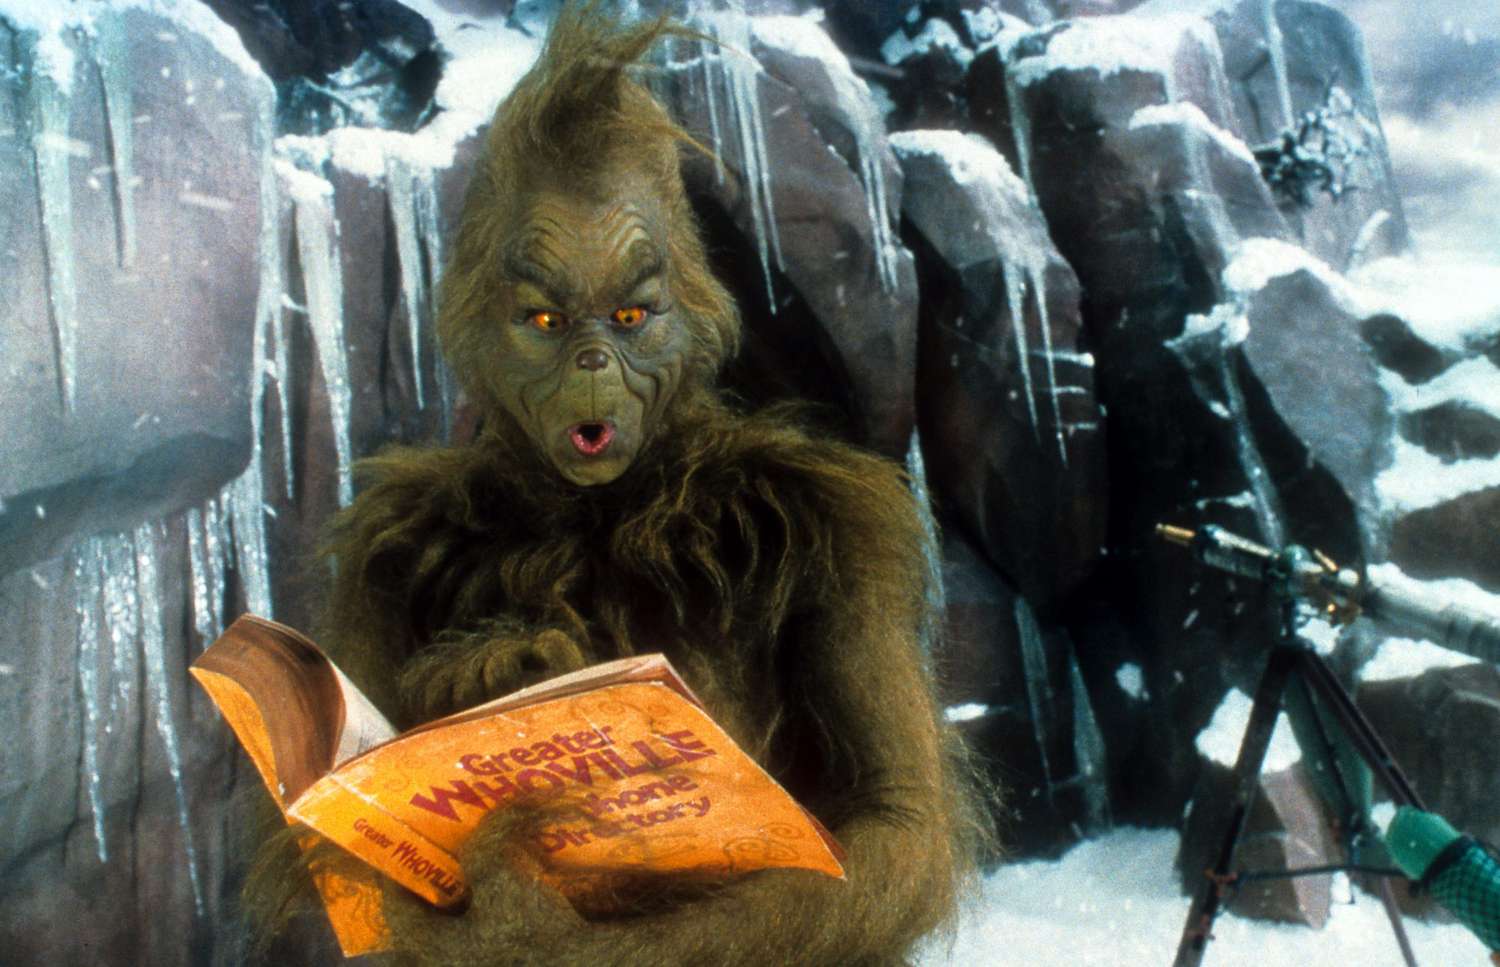 An image of the Grinch.